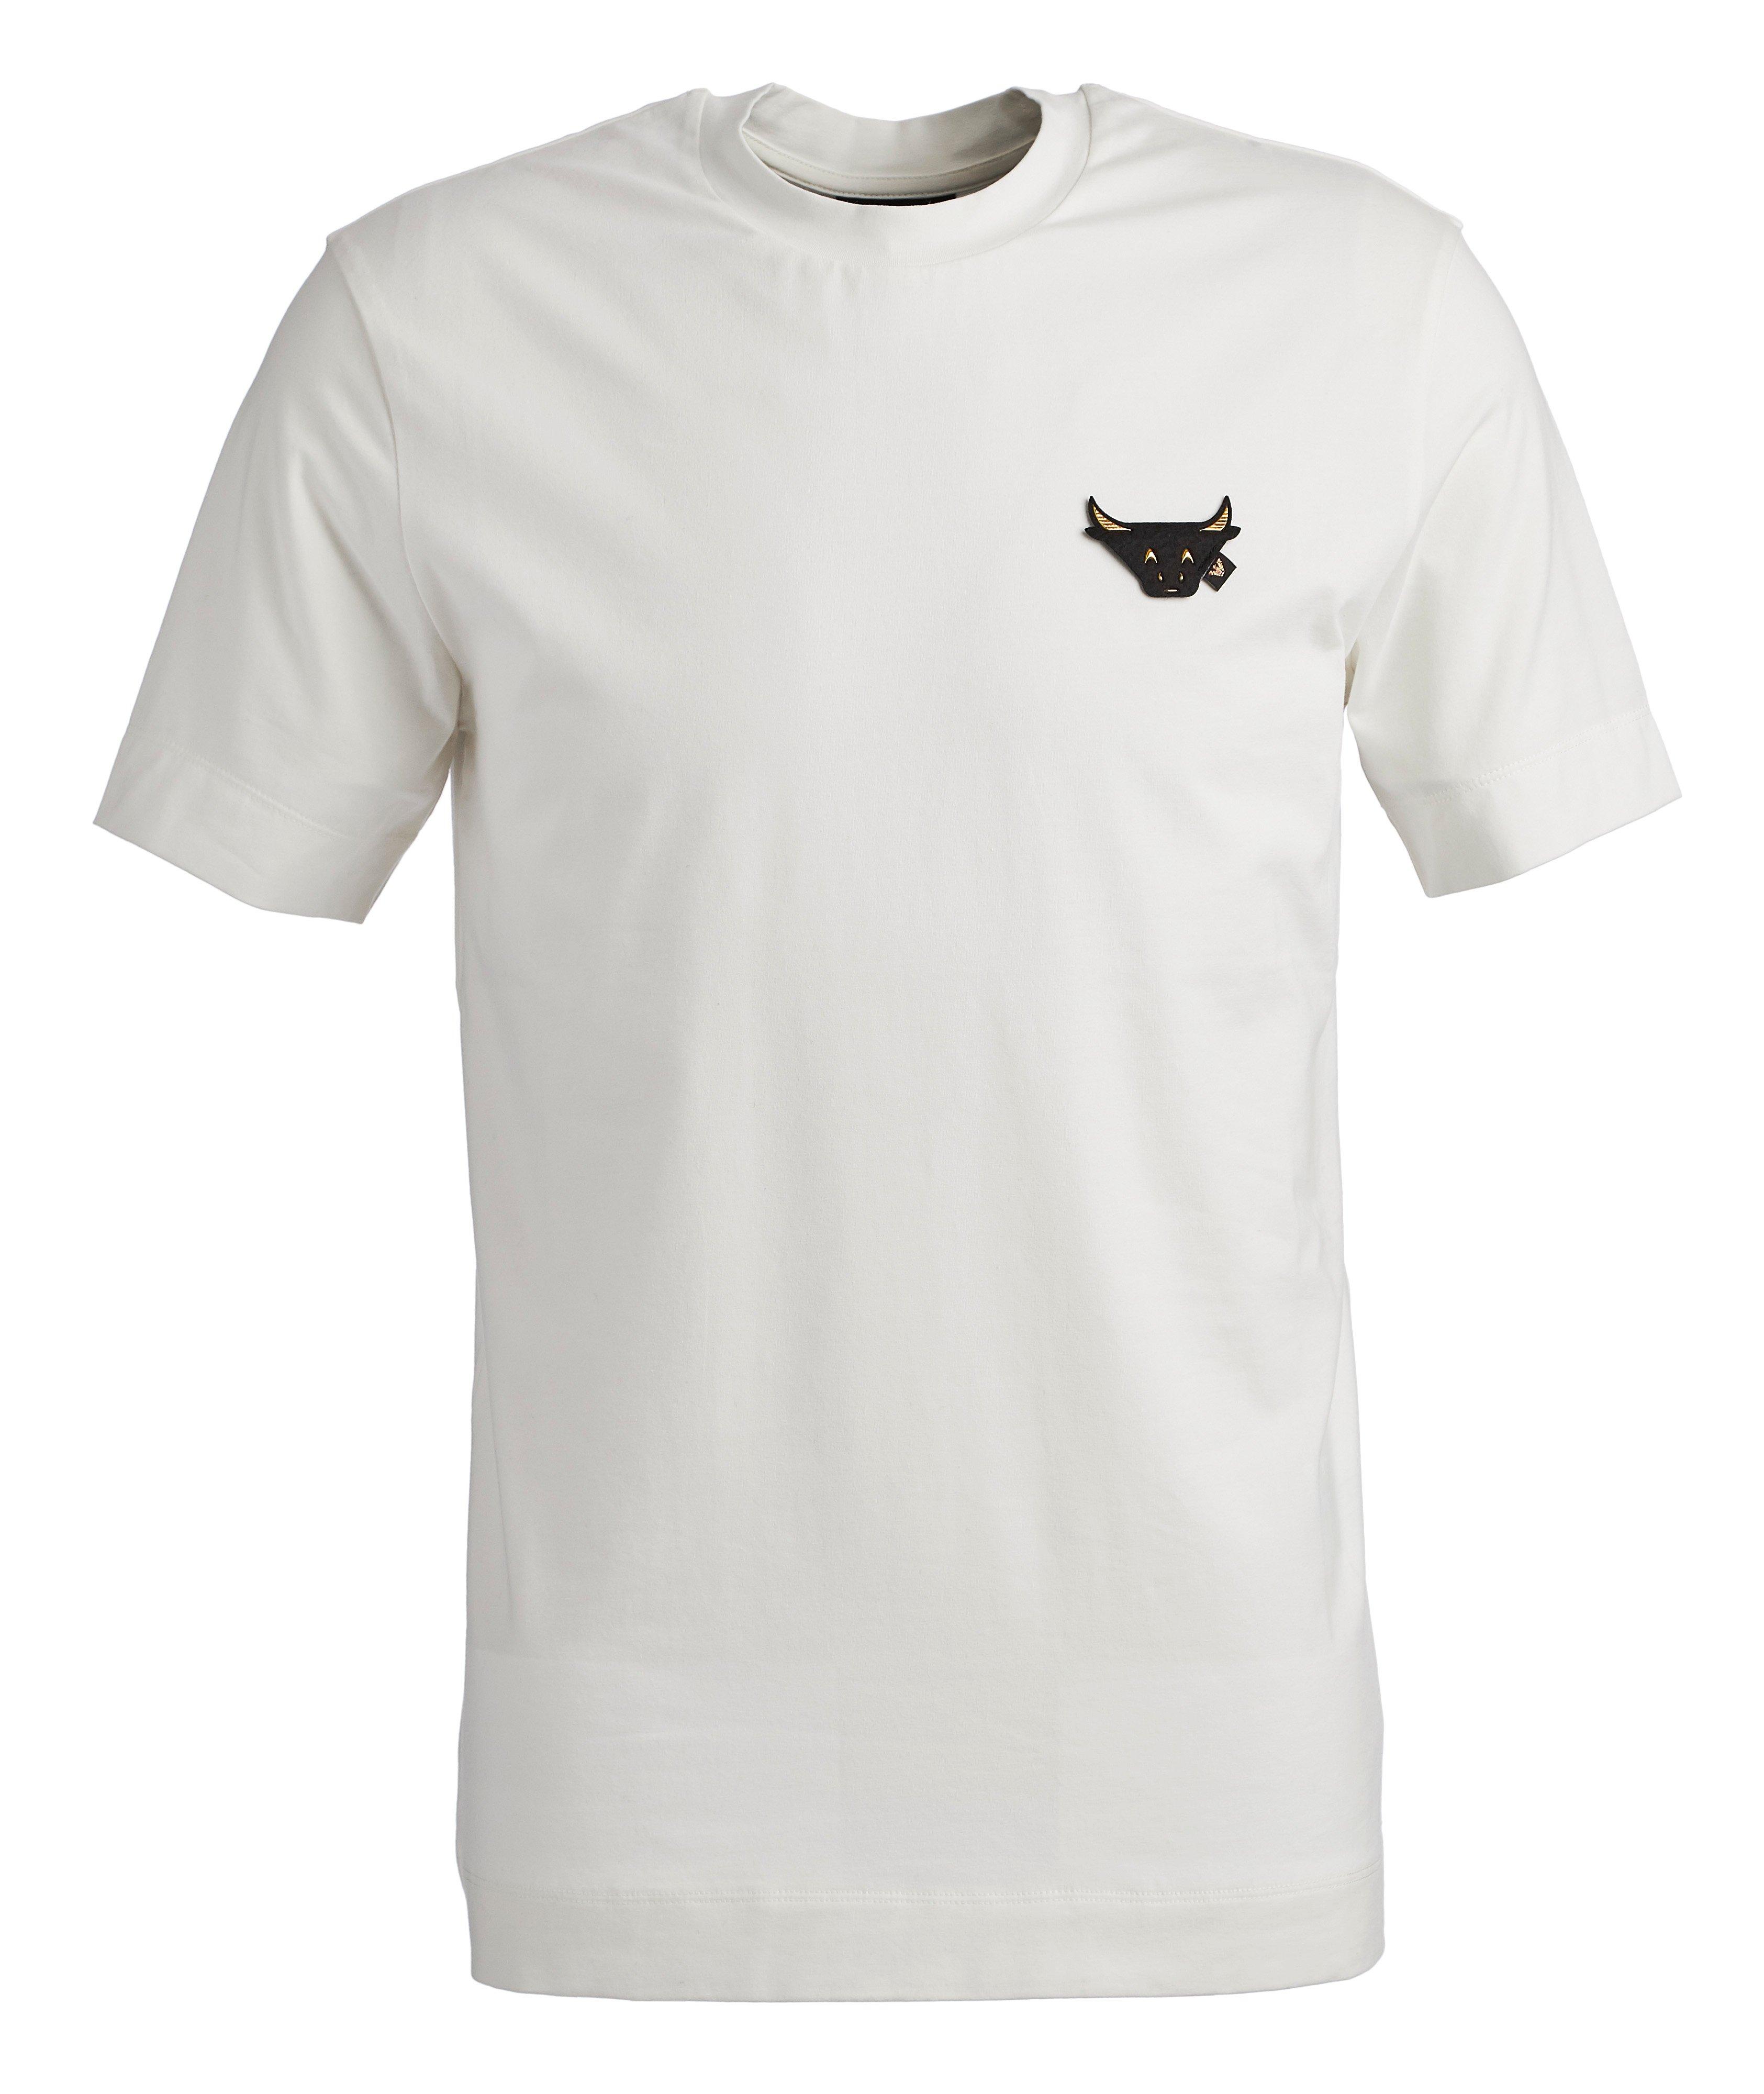 Year of the Ox T-Shirt image 0